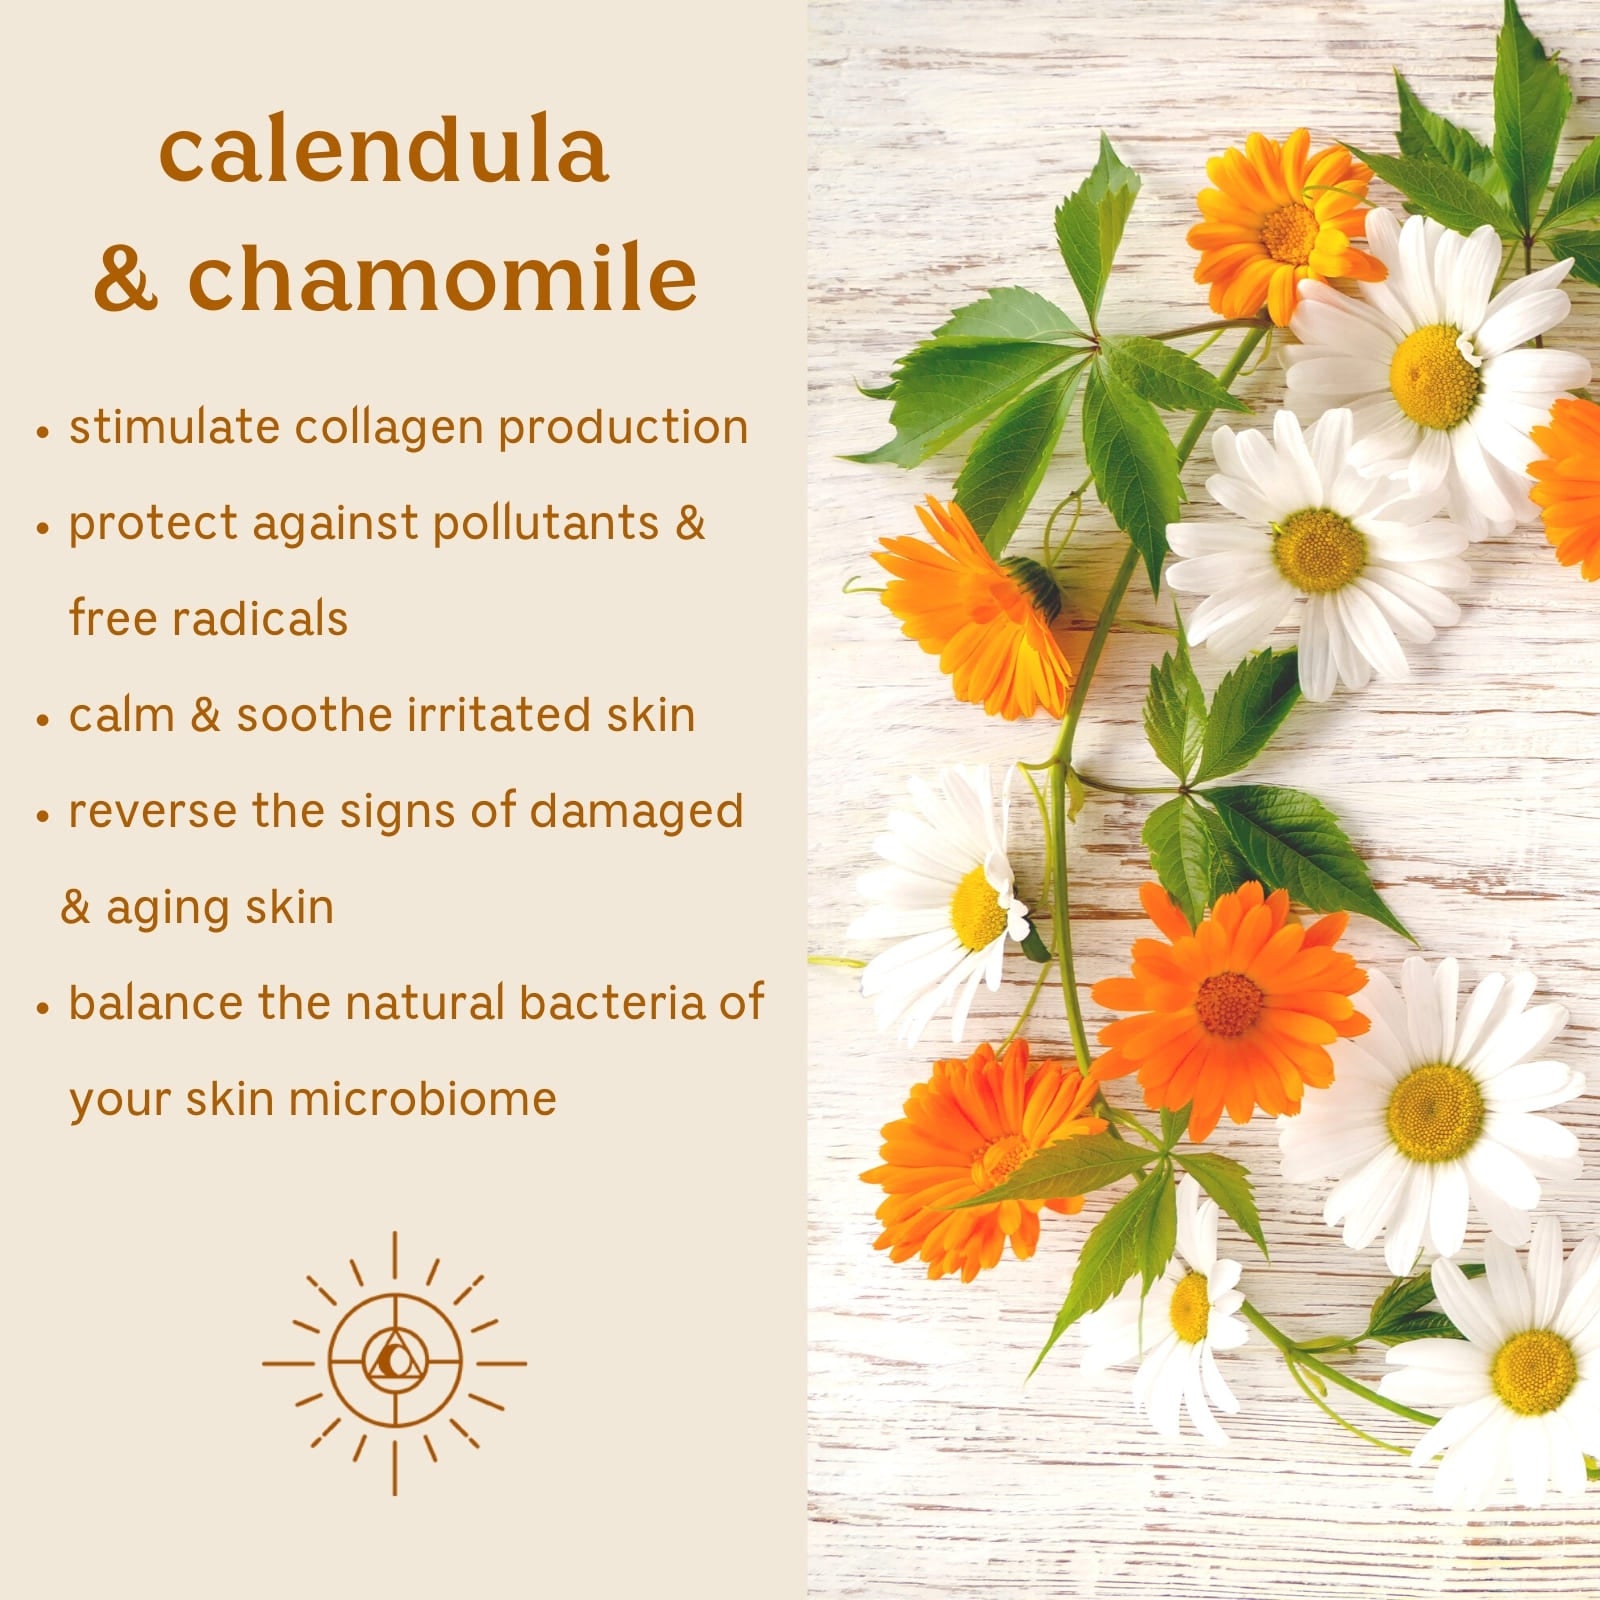 Solluna's Feel Good Asc2P Vitamin C Serum Key Ingredient Benefit Description. Calendula & Chamomile: Stimulate collagen production, Protect against pollutants & free radicals, Calm & soothe irritated skin, Reverse the signs of damaged & aging skin balance the natural, Bacteria of your skin microbiome